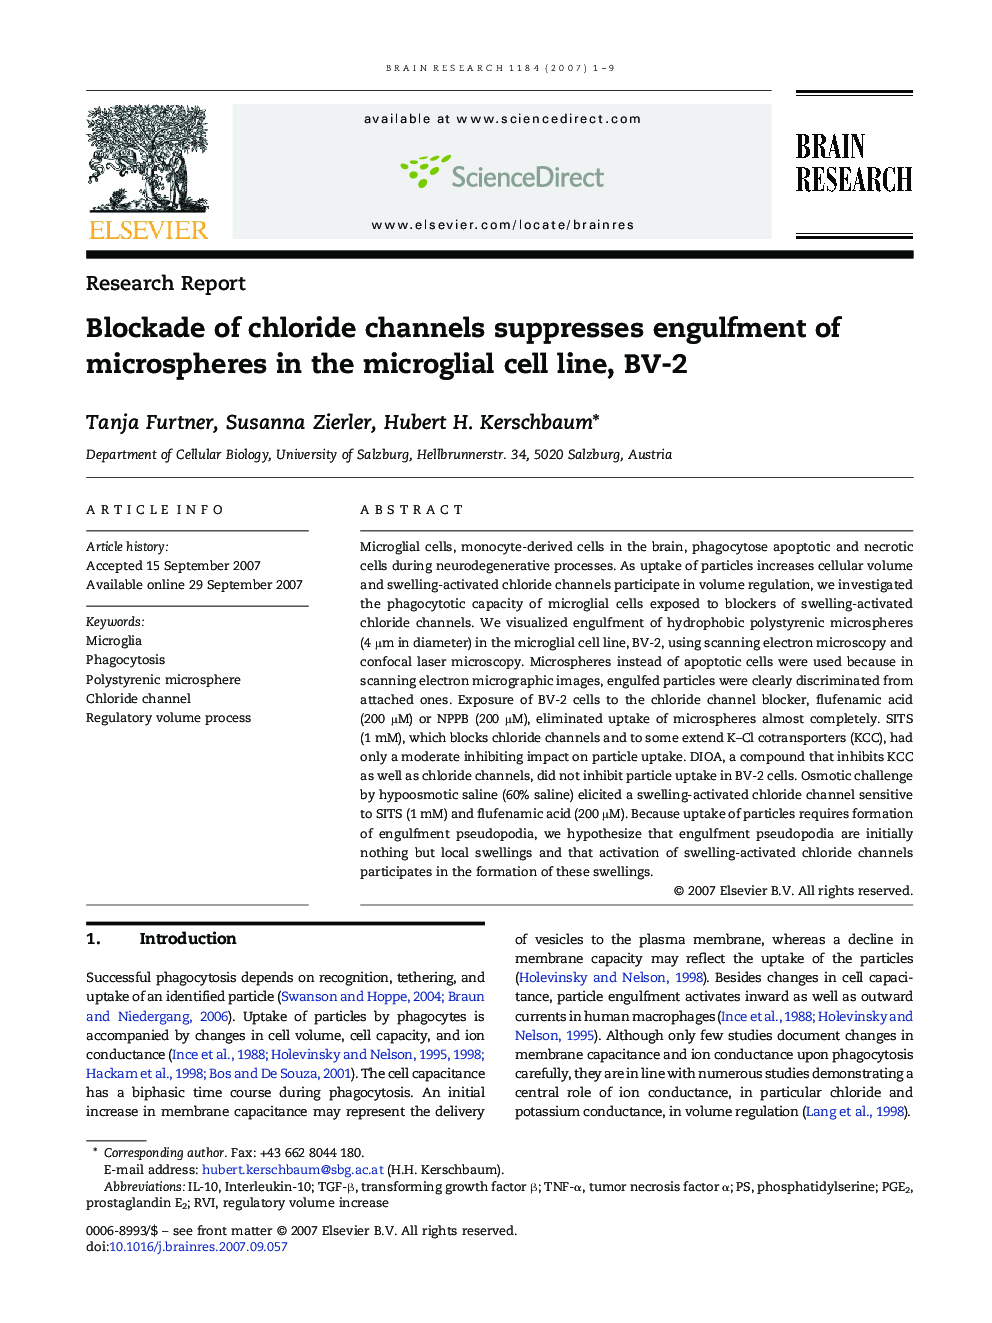 Blockade of chloride channels suppresses engulfment of microspheres in the microglial cell line, BV-2